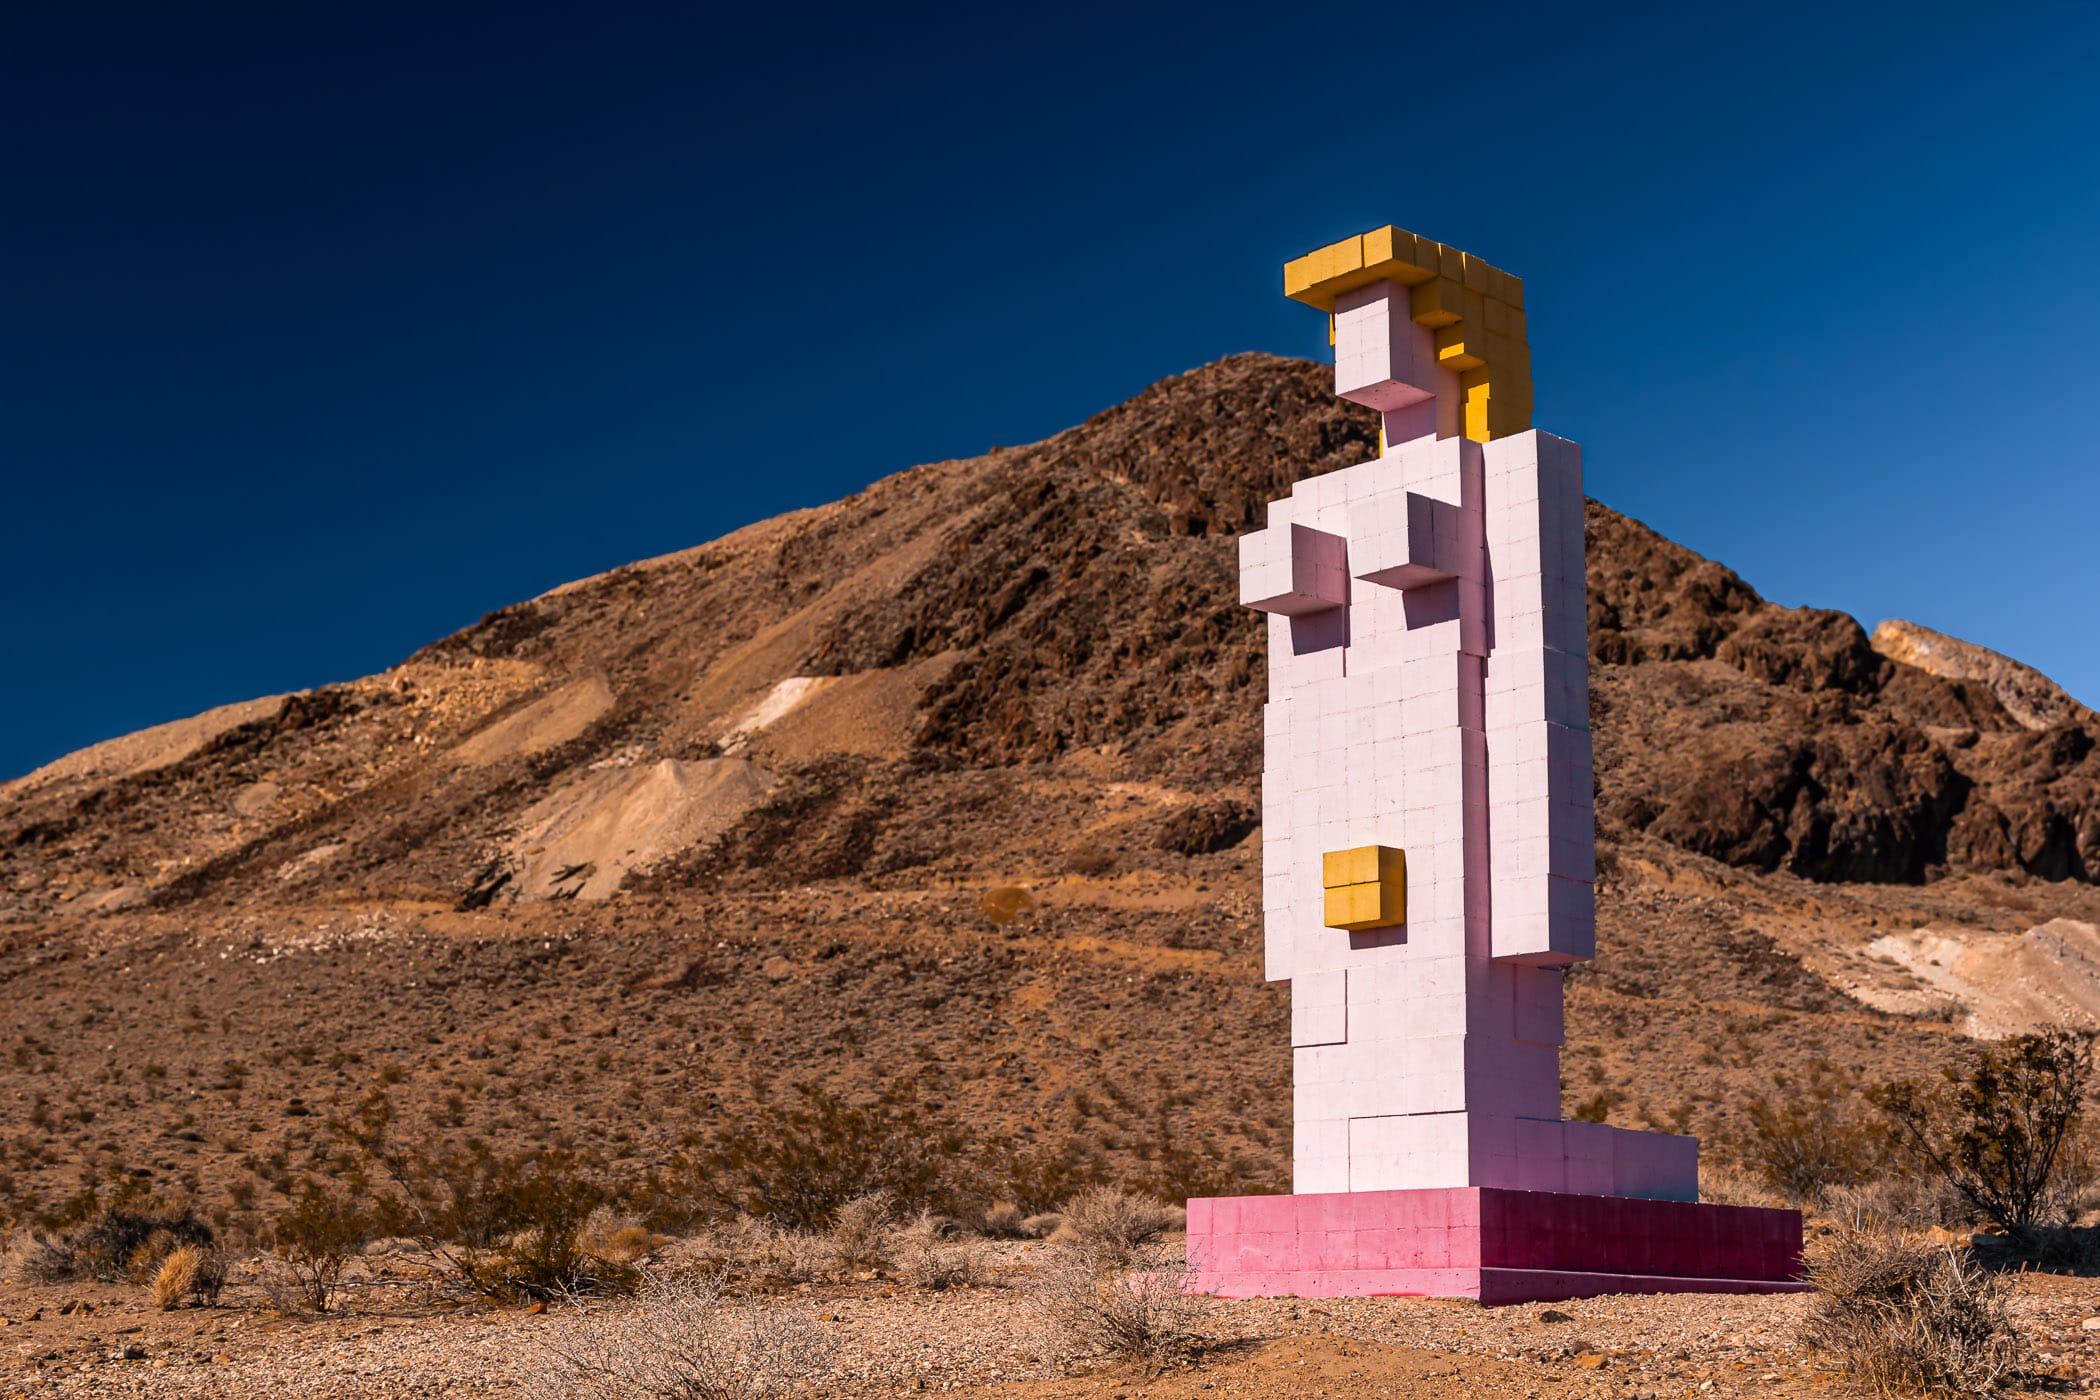 Hugo Heyrman's "Lady Desert: The Venus of Nevada" rises into the sky at the Goldwell Open Air Museum, Rhyolite, Nevada.